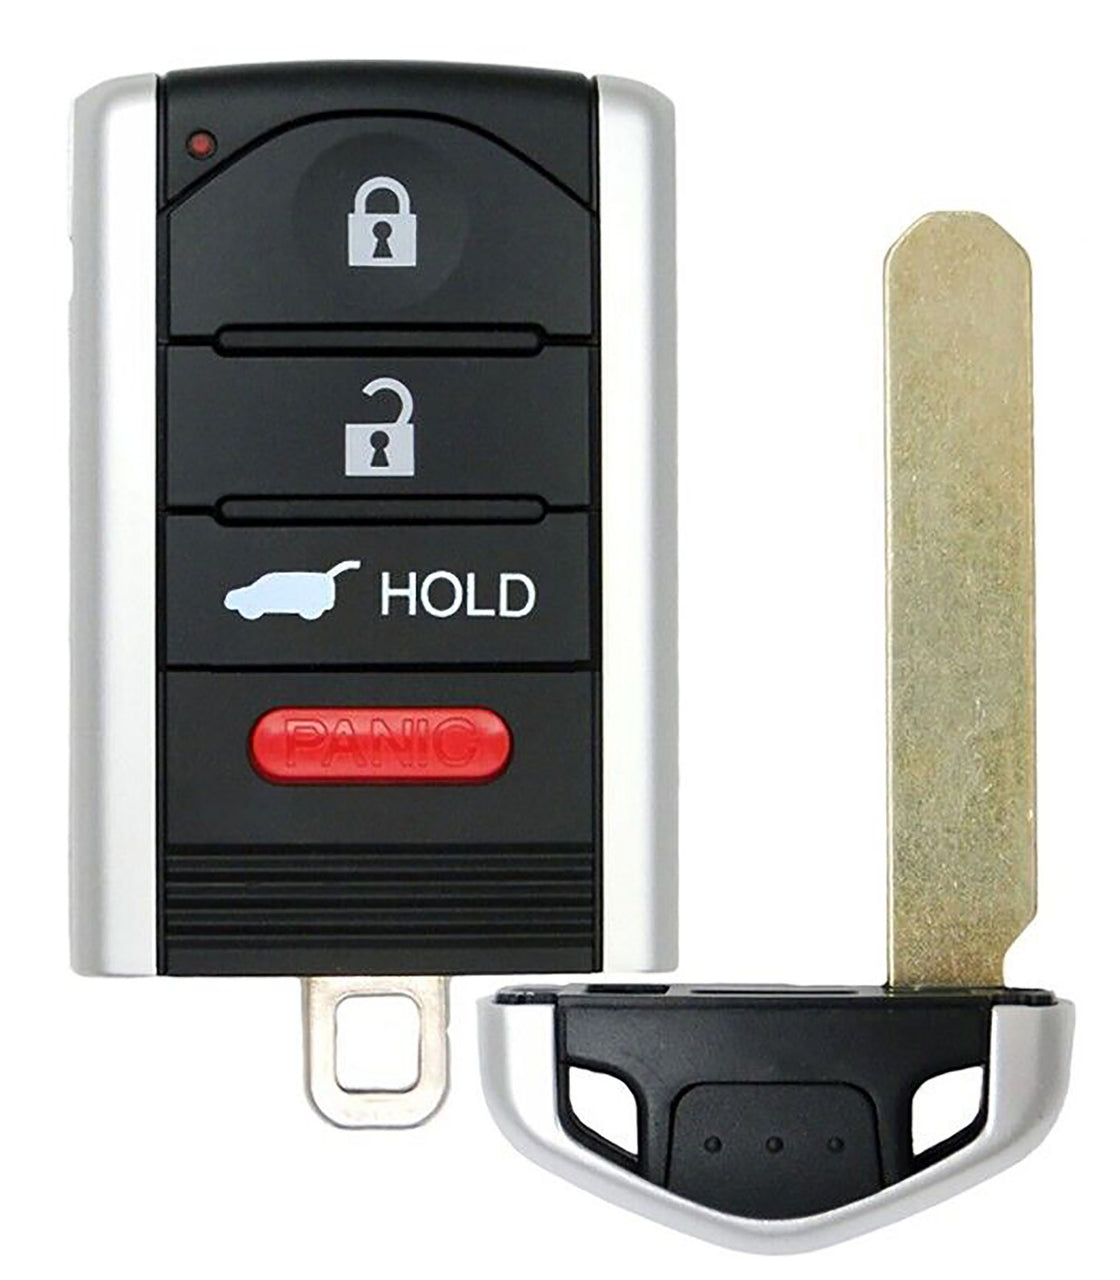 1x New Replacement Proximity Key Fob Compatible with & Fit For Acura Vehicles (Check Fitment) - MPN KR5434760-06